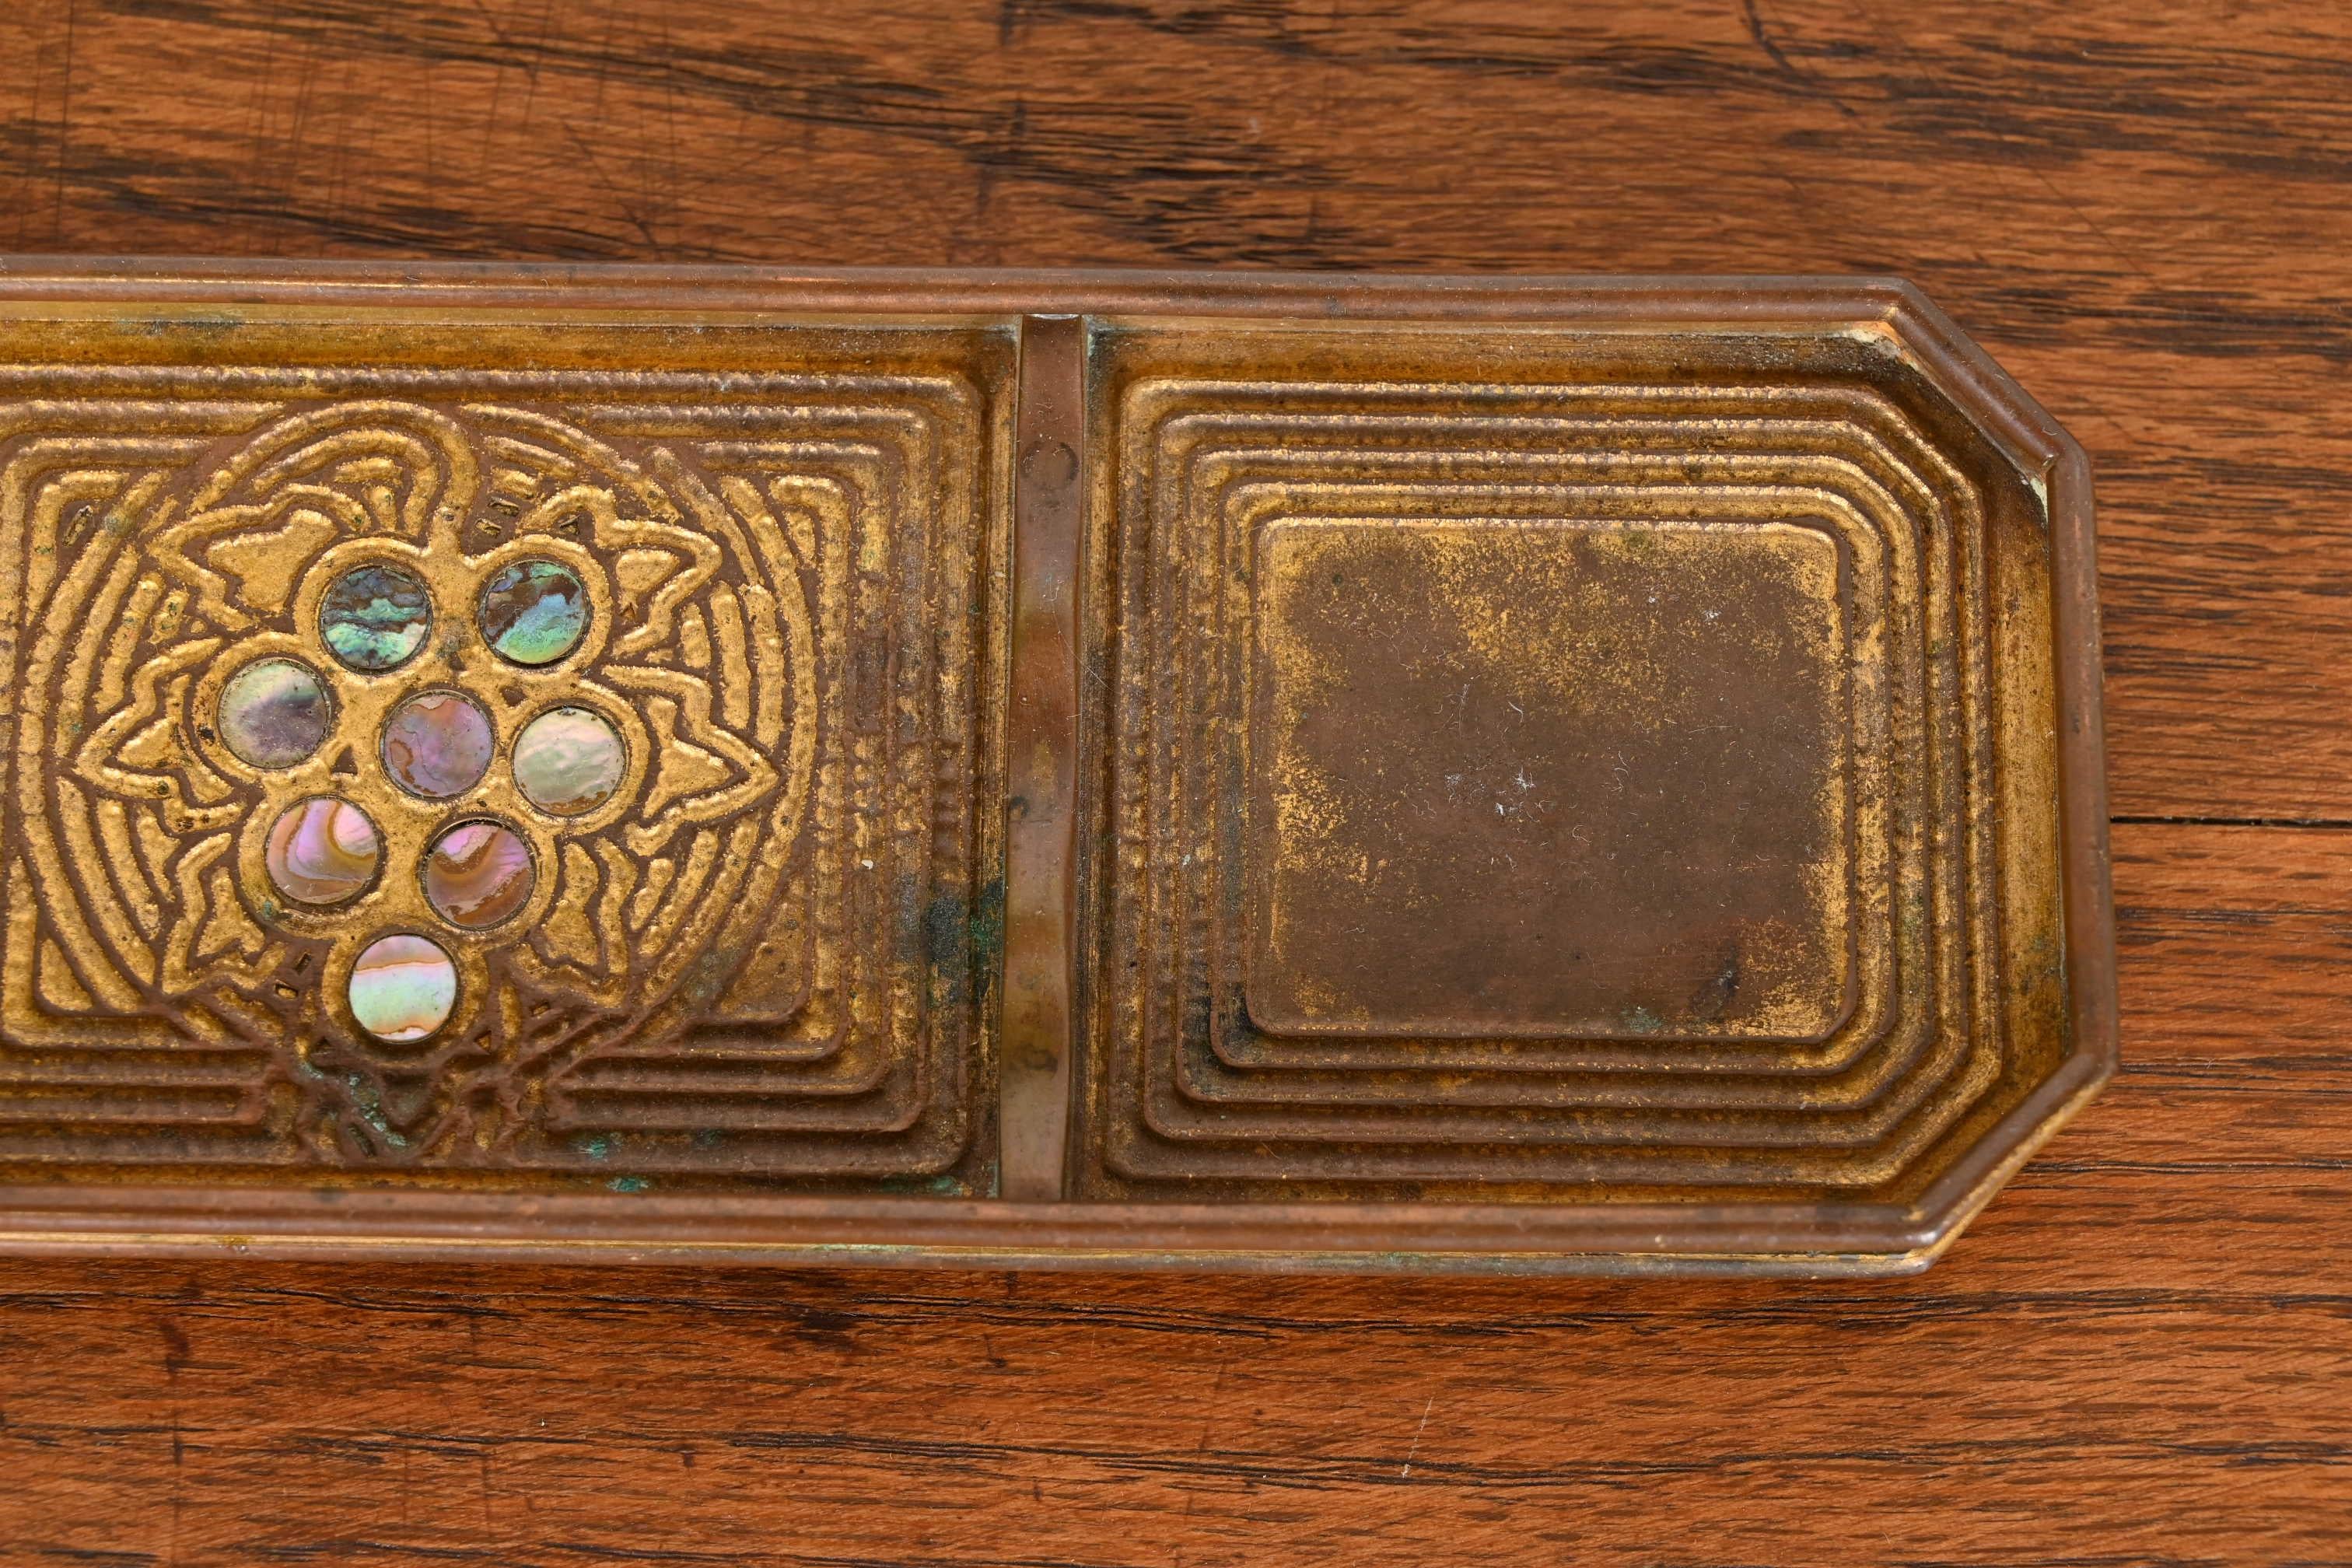 Tiffany Studios New York Bronze Doré and Abalone Pen Tray For Sale 4